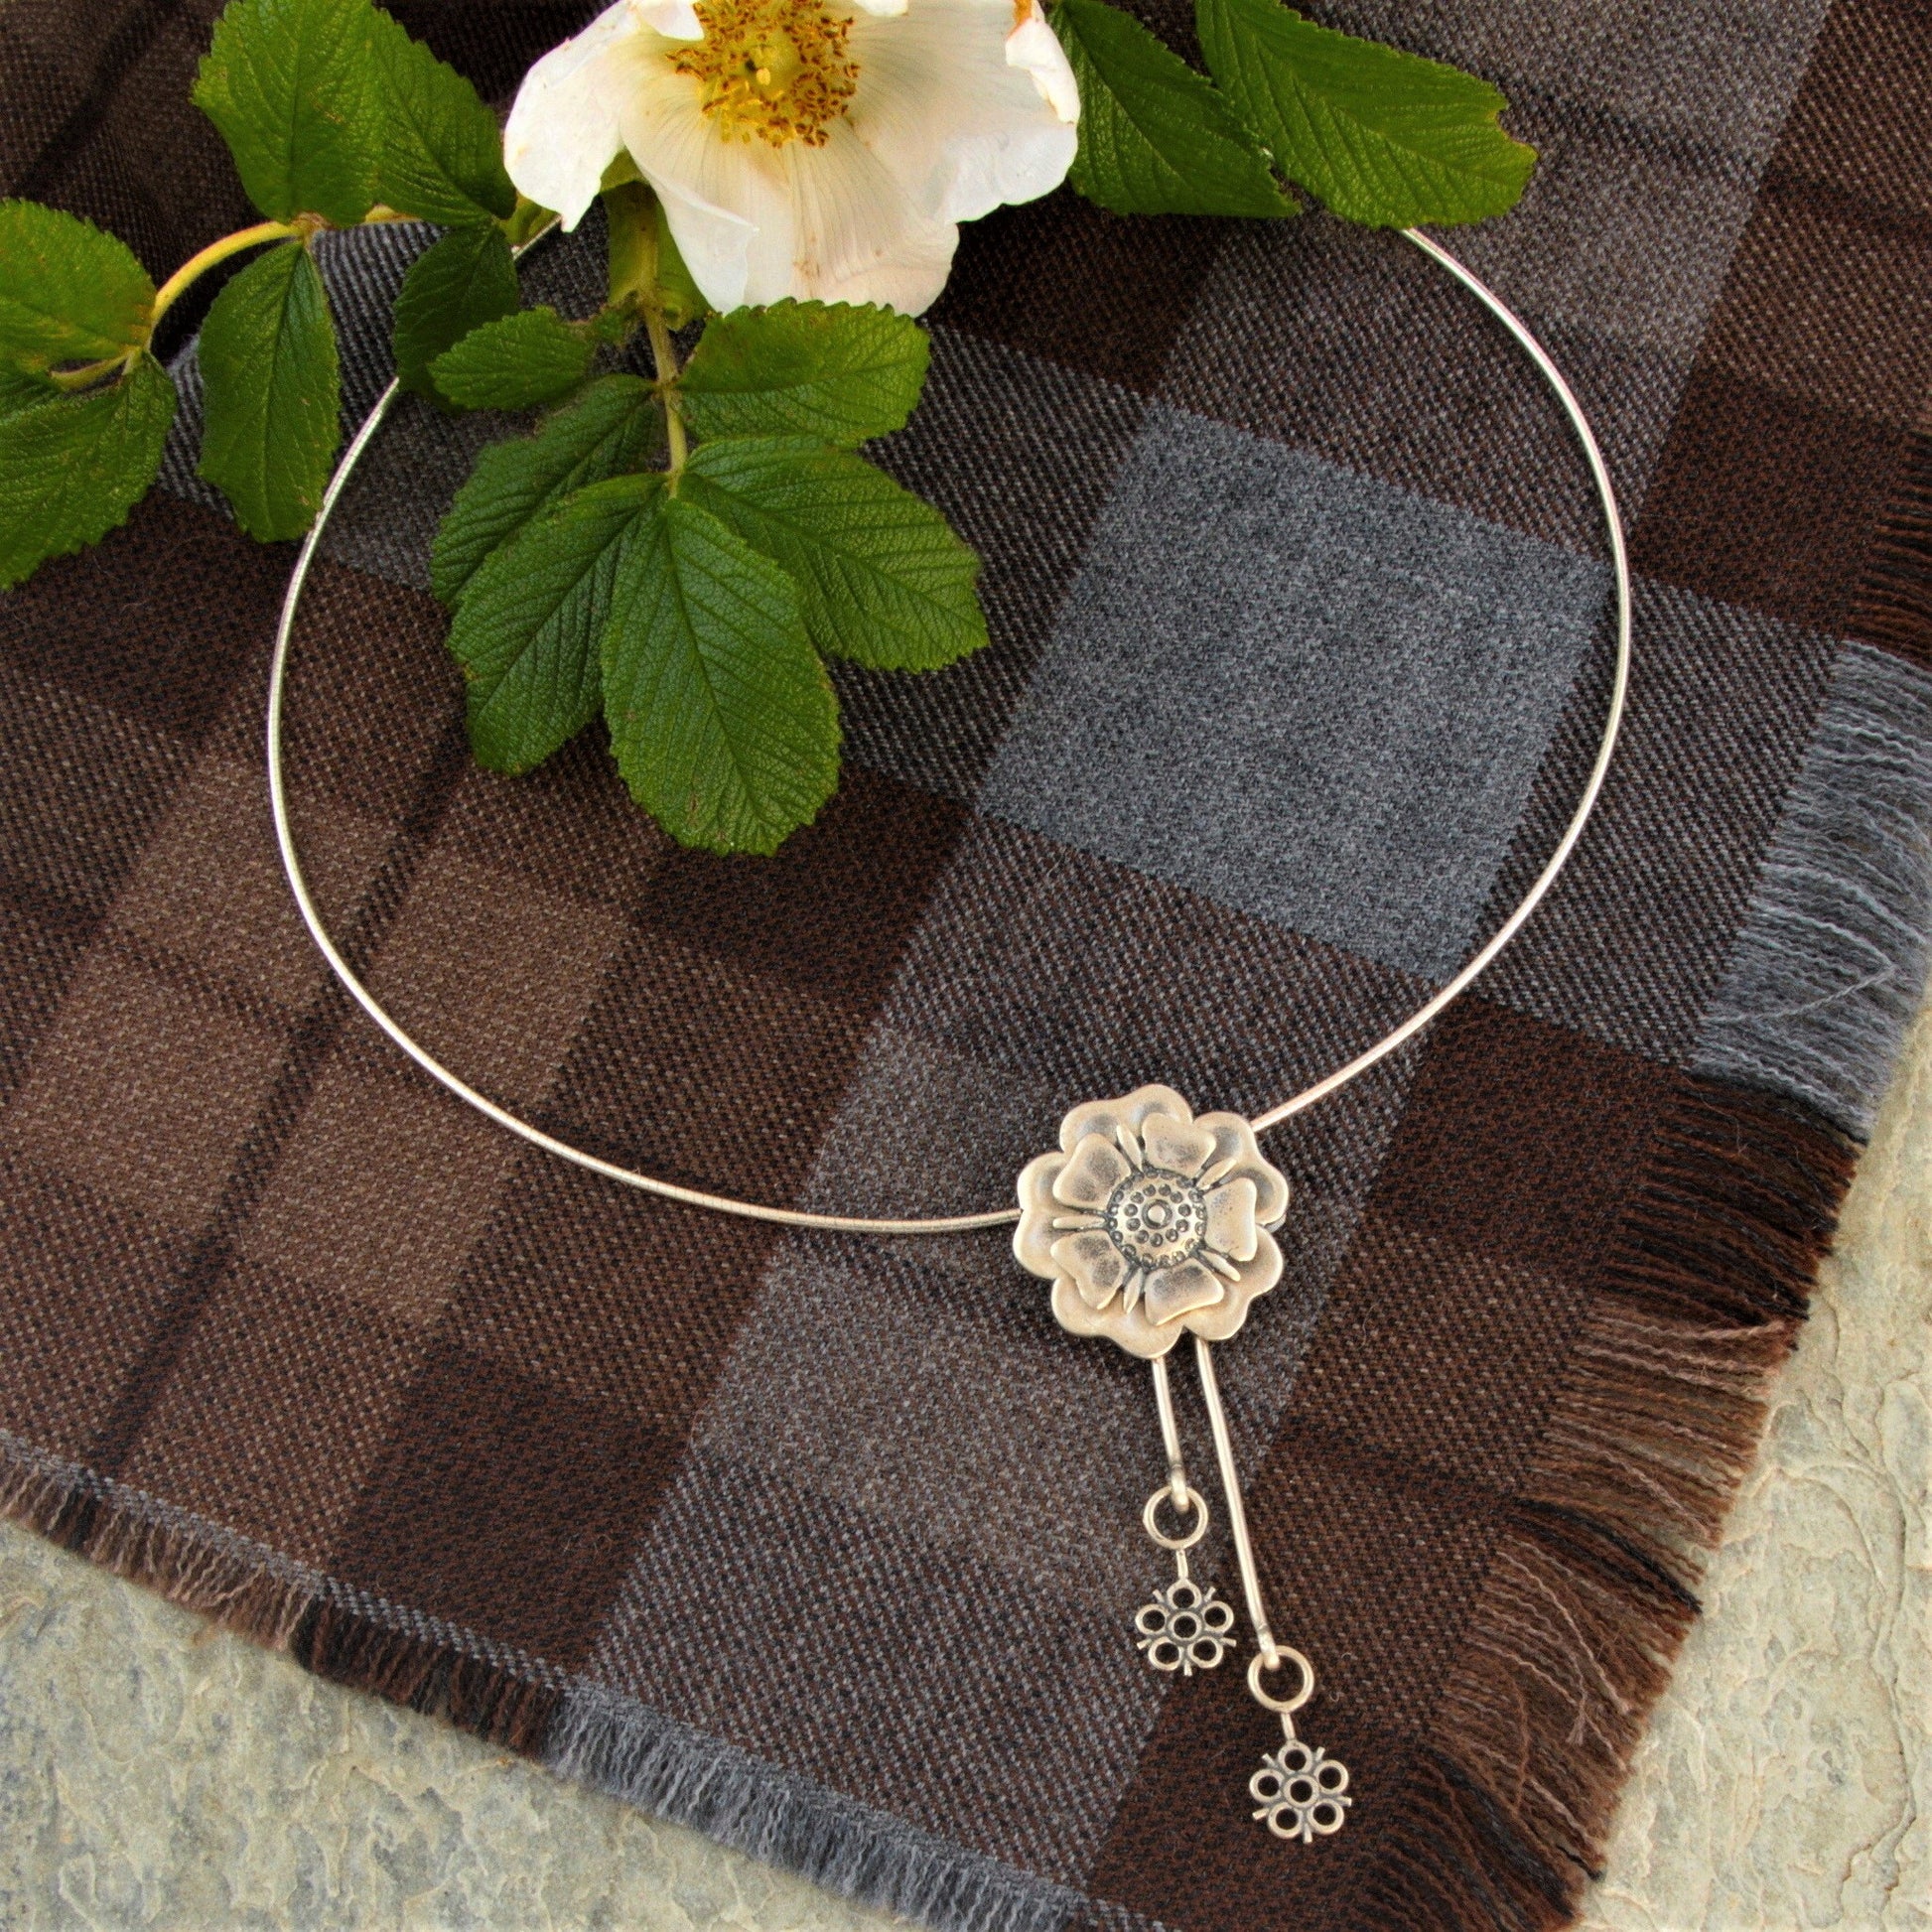 Outlander Jacobite Rose Coin Collection necklace with rose charm and drop detail on a tartan background with rose by Aurora Jewellery, Orkney, Scotland